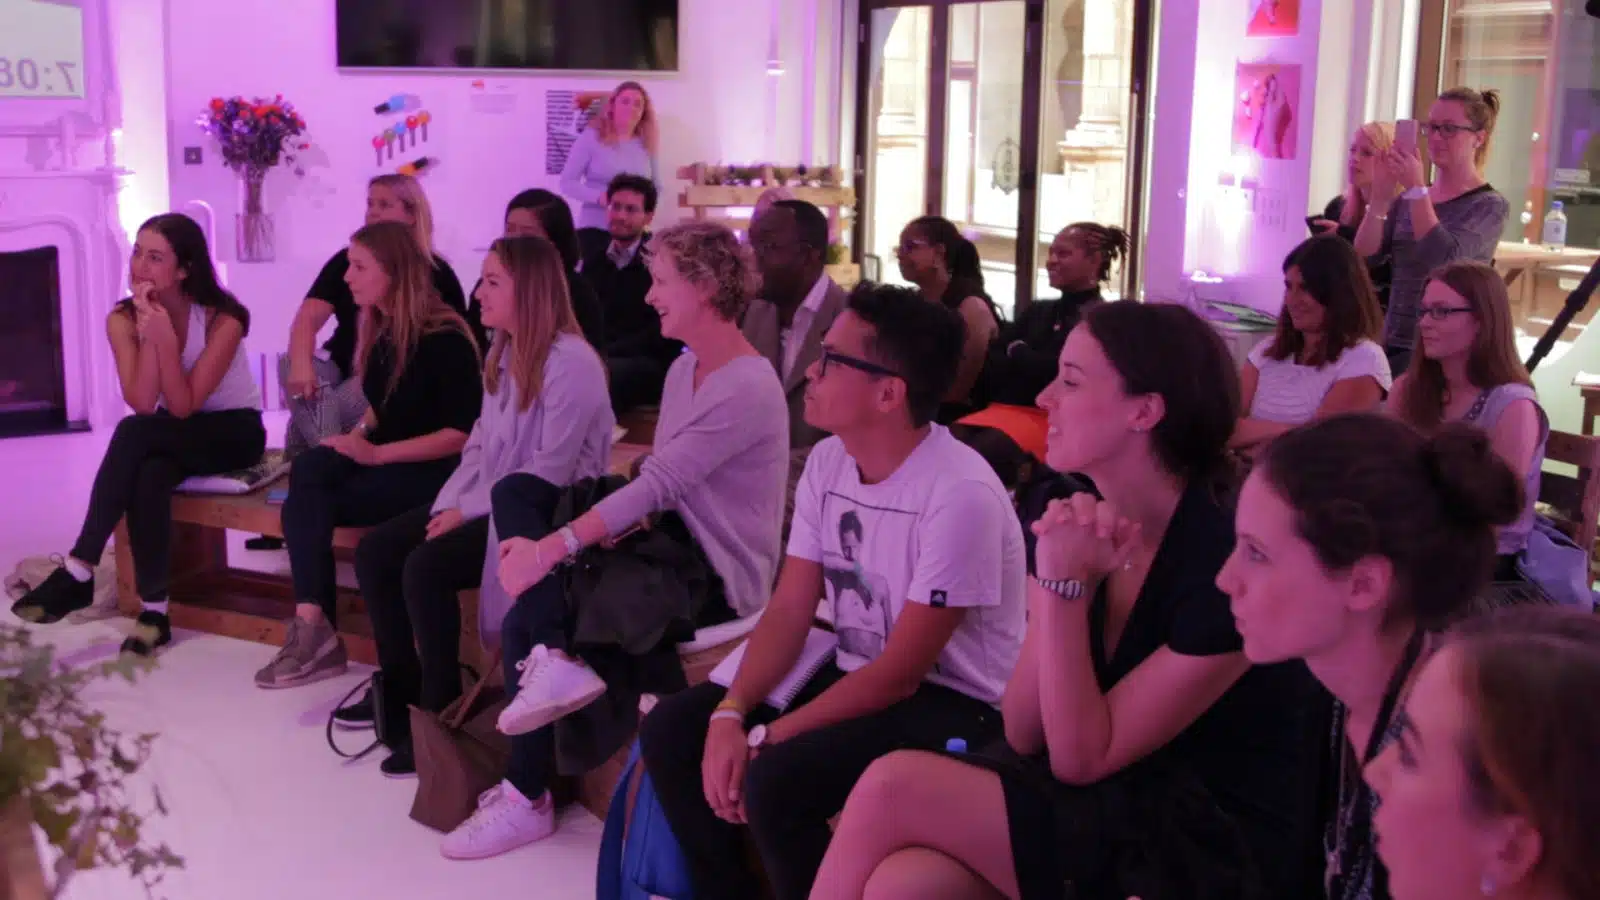 Working with Clarion Comms, Conversion Marketing agency Drew+Rose designed, curated, and delivered an influencer event to promote Nectar Card